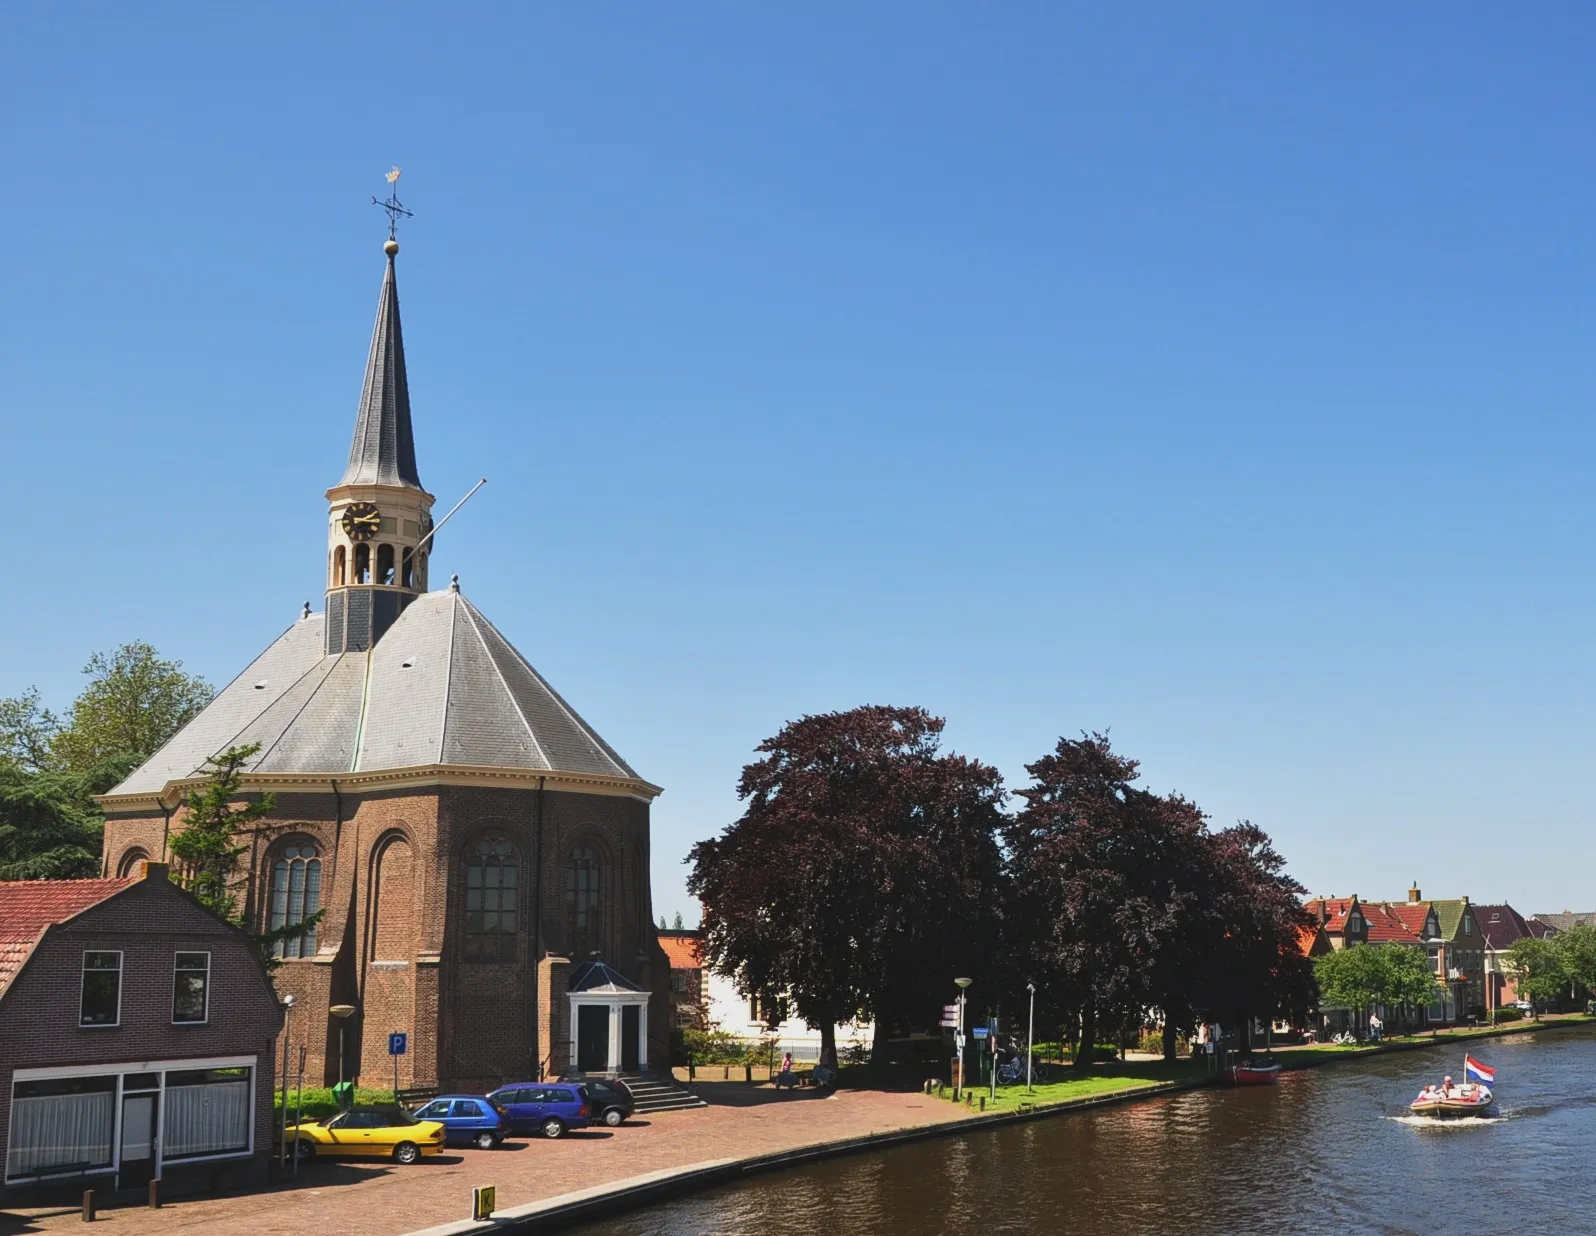 Photo showing: The old village centre of Woubrugge on the Woudwetering canal with the Netherlands' Reformed Church, a listed building (municipality Kaag en Braassem, Provincie South-Holland, Netherlands).